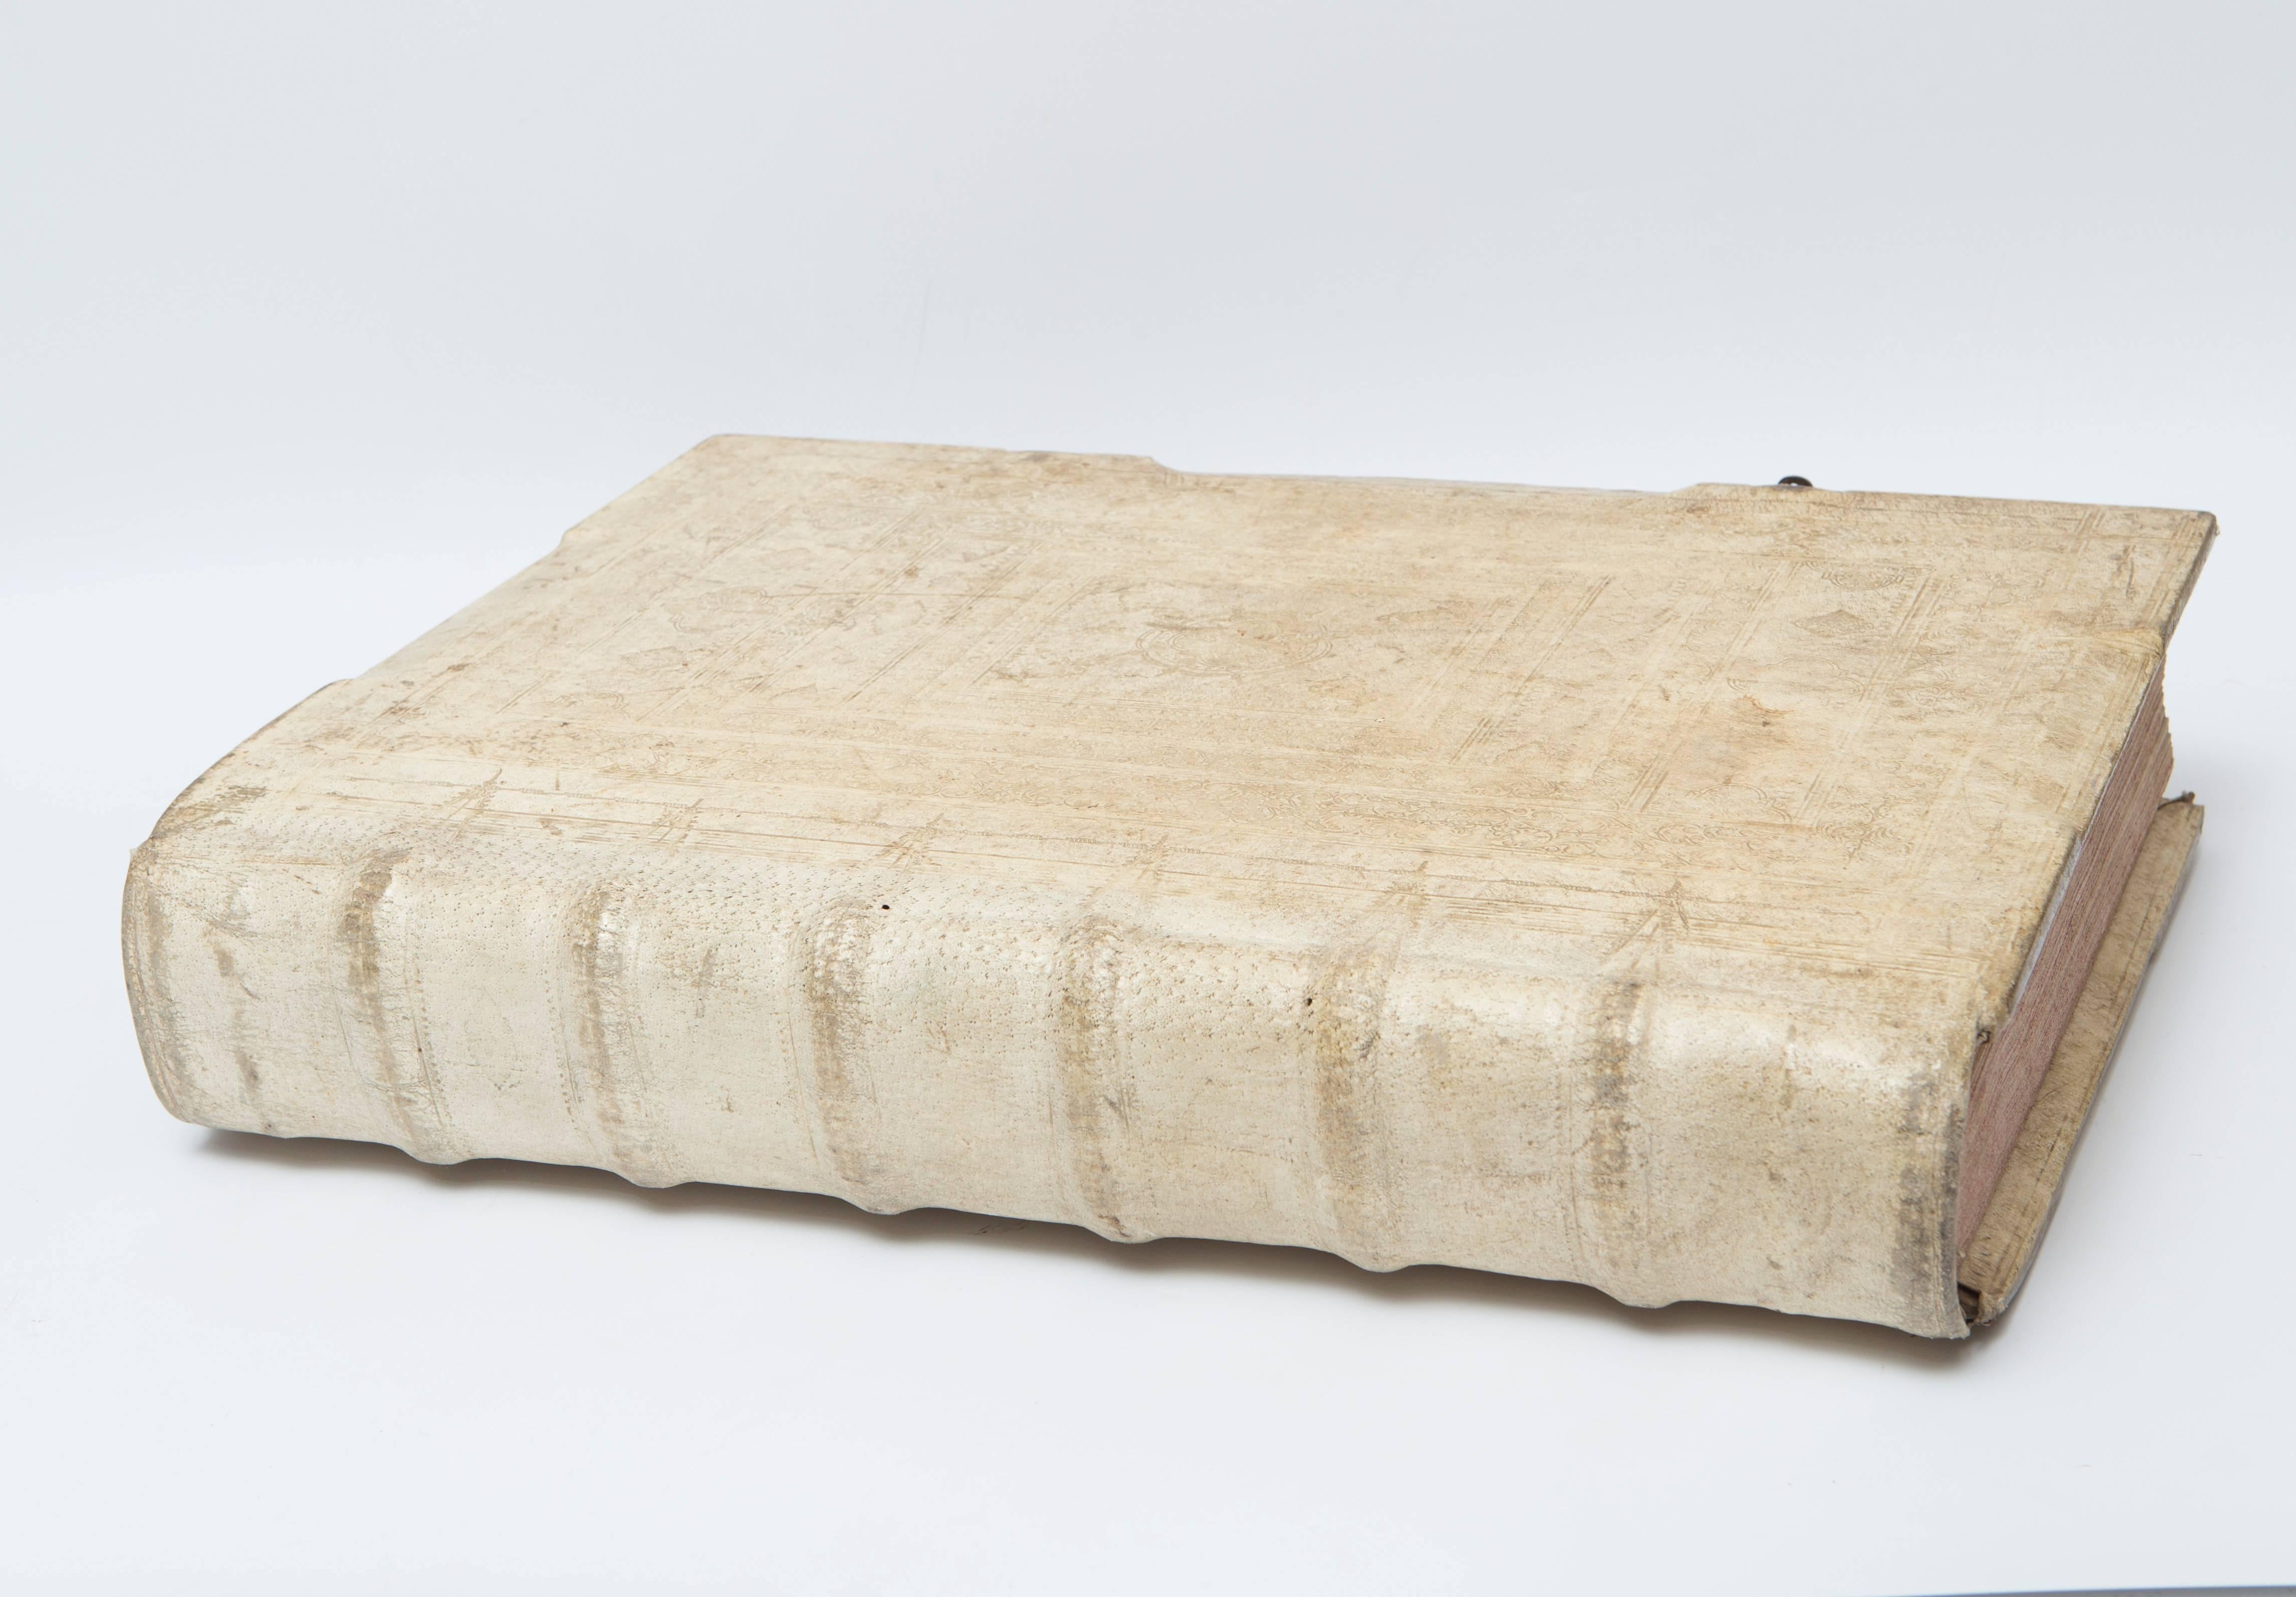 Large all Vellum Music Score, Circa 1680,  book with iron latches in a very impressive size and detail. Inside the 17th Century vellum book are pages printed with red and black notes and words and music score. Very impressive piece of art in an all